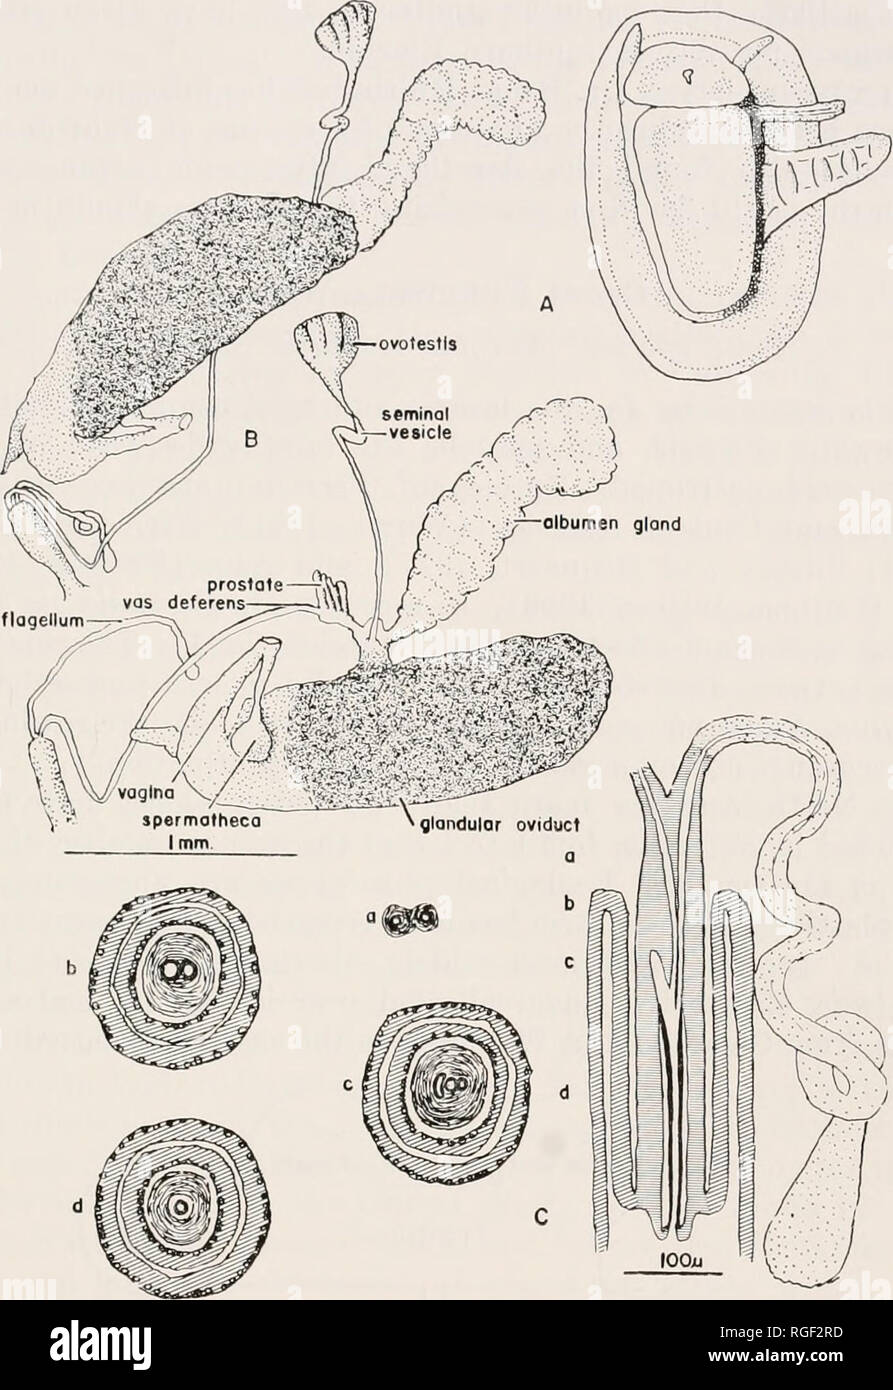 . Bulletin of the Museum of Comparative Zoology at Harvard College. Zoology. BASCH : FRESHWATER LIMPET SNAILS 425. Fig. 10. Eeproductive system of Hchctnnryhis exccntriciis. A, animal witli male genitalia extended; B, entire reprodnctive system, dissected from a mature specimen, as viewed from the left side, and with the organs separated. The albumen gland is a glassy white color, and the glandular oviduct when well developed is bright yellow. Other organs are whitish. Tlie 1 mm. scale refers to B only; C, male genitalia, as reconstructed fi-om whole mounts and serial sections: a, 1&gt;, c, d  Stock Photo